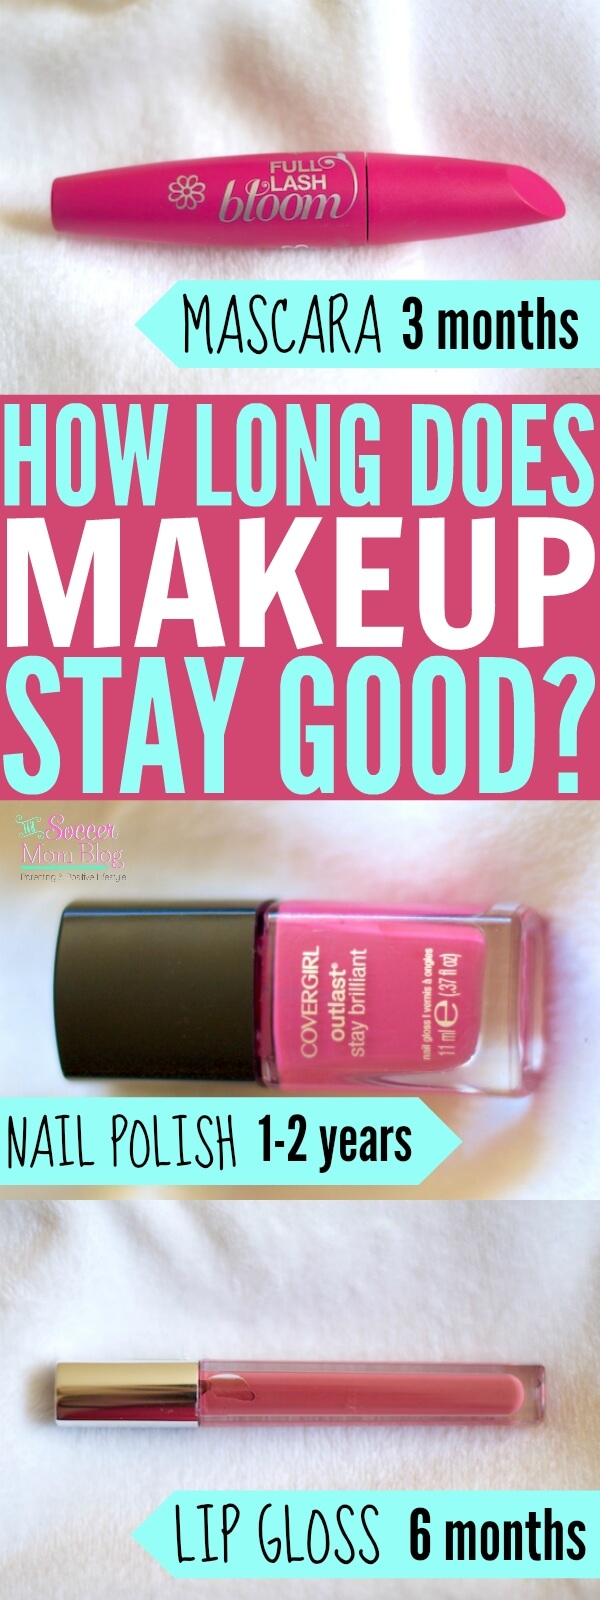 How long does makeup last? Plus tips for keeping your cosmetics & beauty products fresh longer!